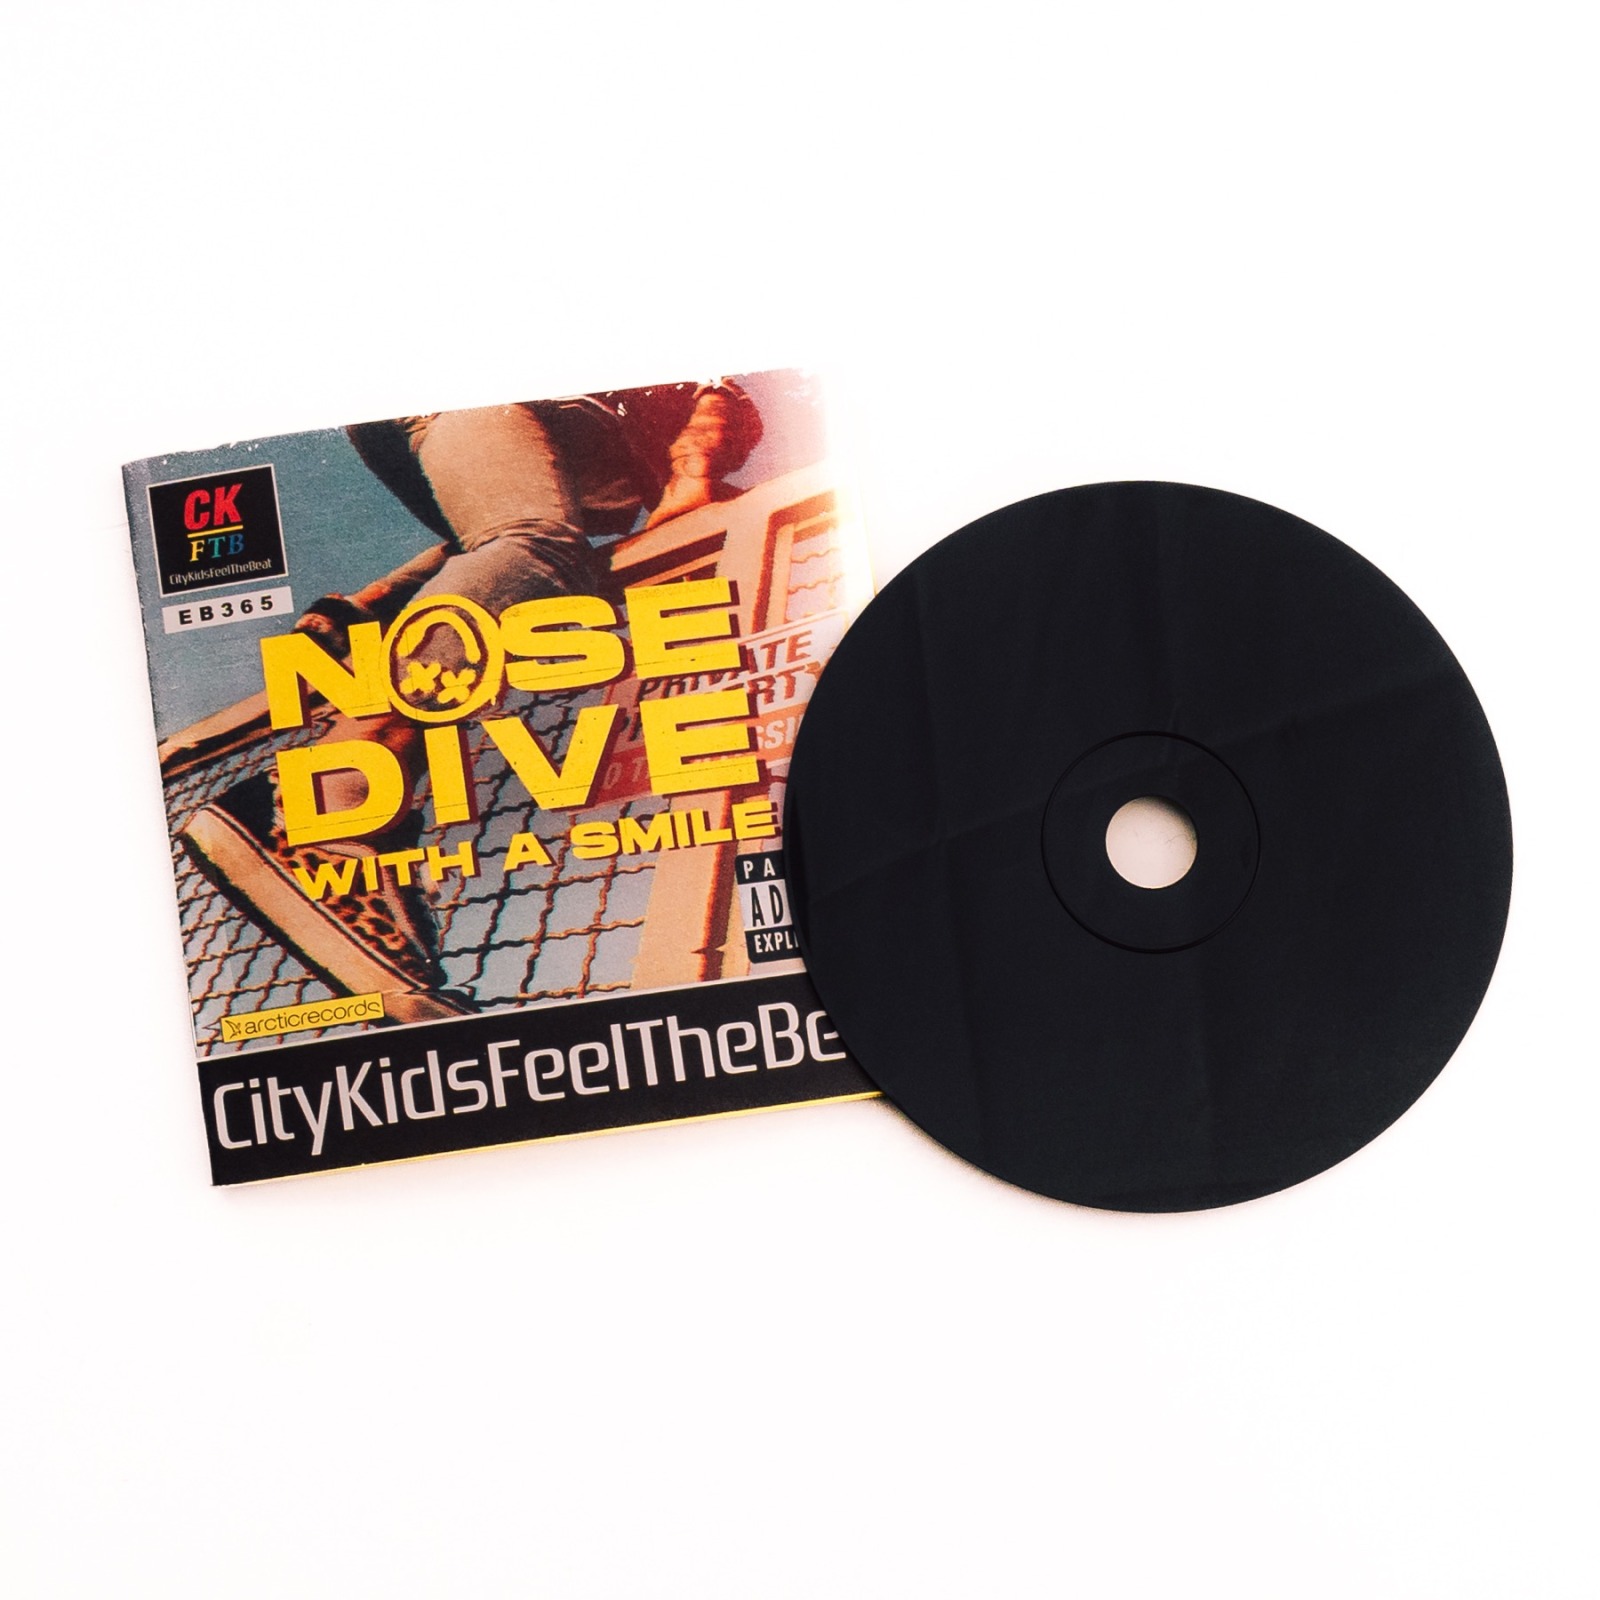 CD - Nosedive With a Smile - Playstation Edition 6